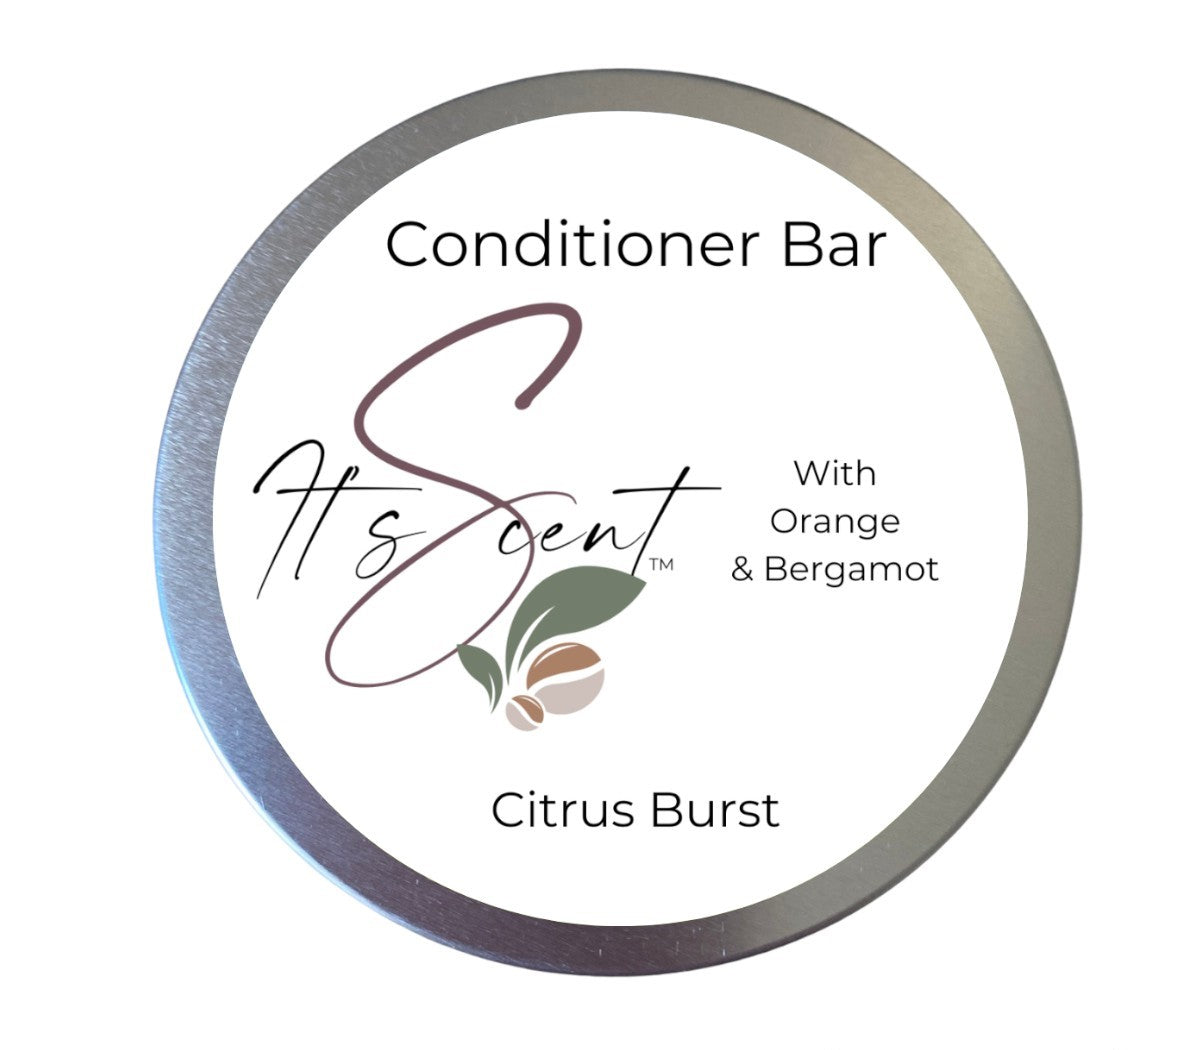 Citrus Burst Conditioner Bar. Suitable for All hair types including Frizzy